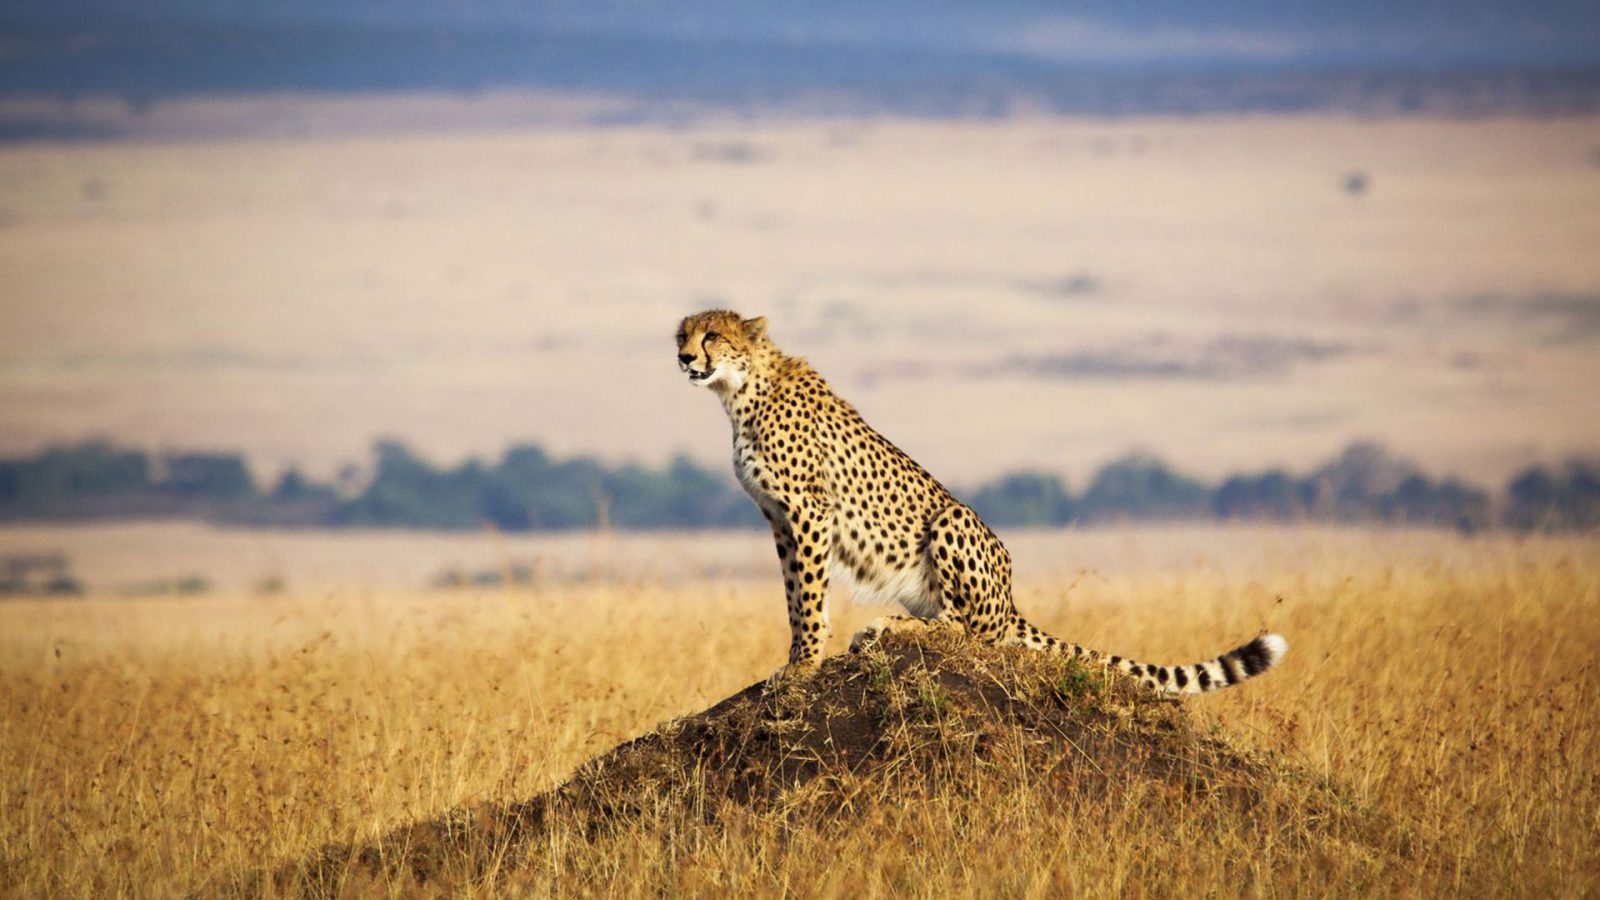 This Biggest, Longest, Tallest Quiz Will Be Extremely Hard for Everyone Except for Geography Experts Cheetah in Maasai Mara, Kenya